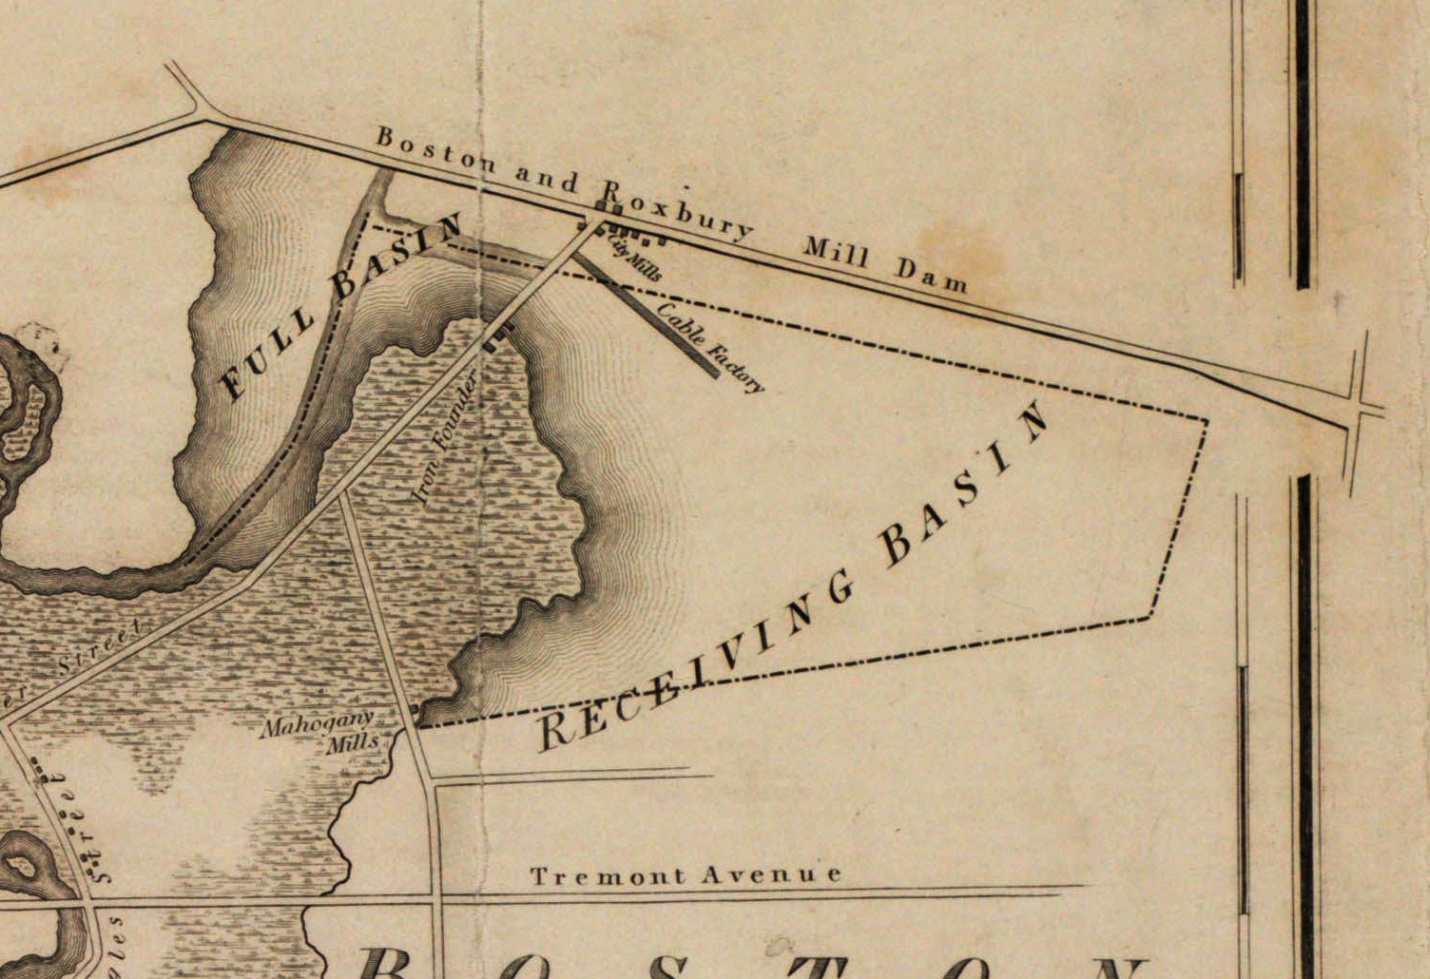 Map of the Town of Roxbury Surveyed by John G. Hales (1834) - from the Leventhal Map & Education Center, Boston Public Library